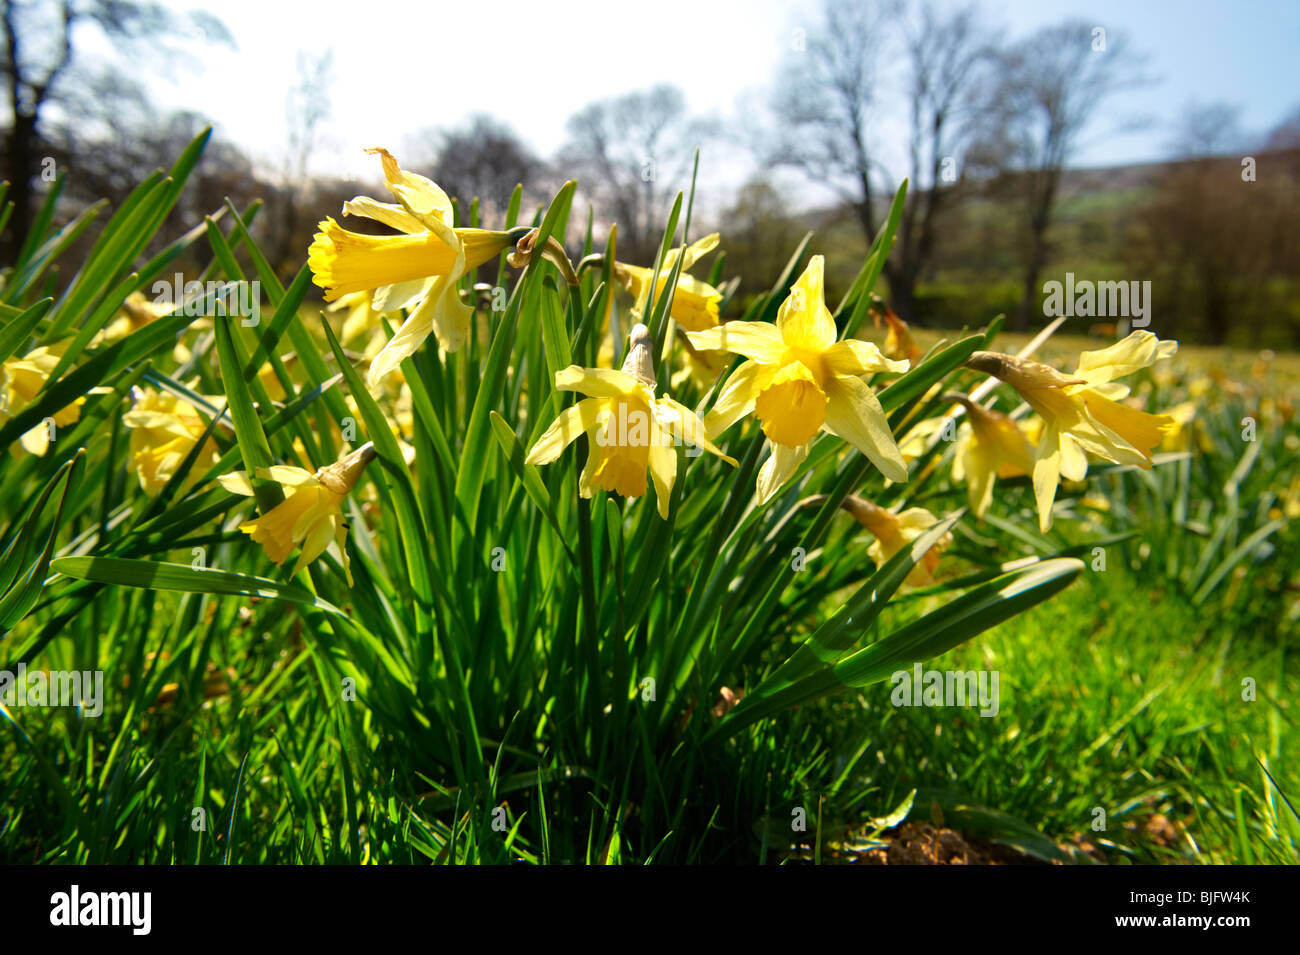 Wild Daffodil flowers, ( Narcissus pseudonarcissus ) or Lent Lilly plants flowering in Farndale, North Yorks Moors, North Yorkshire, England Stock Photo